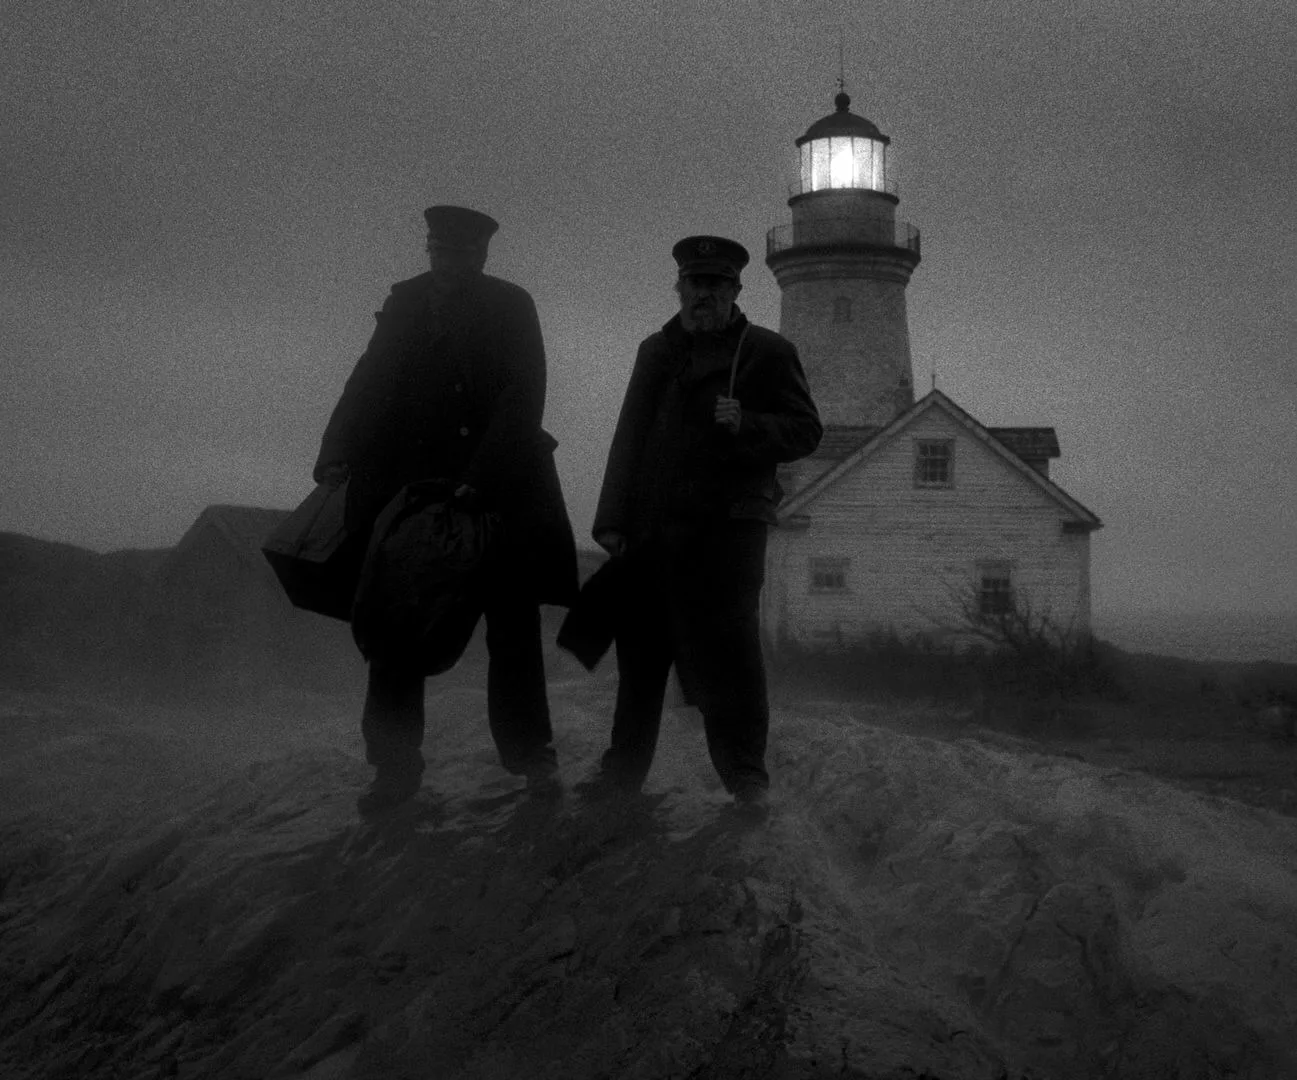 Silhouette of two men standing at the edge of a seaside cliff with a lighthouse glowing behind them